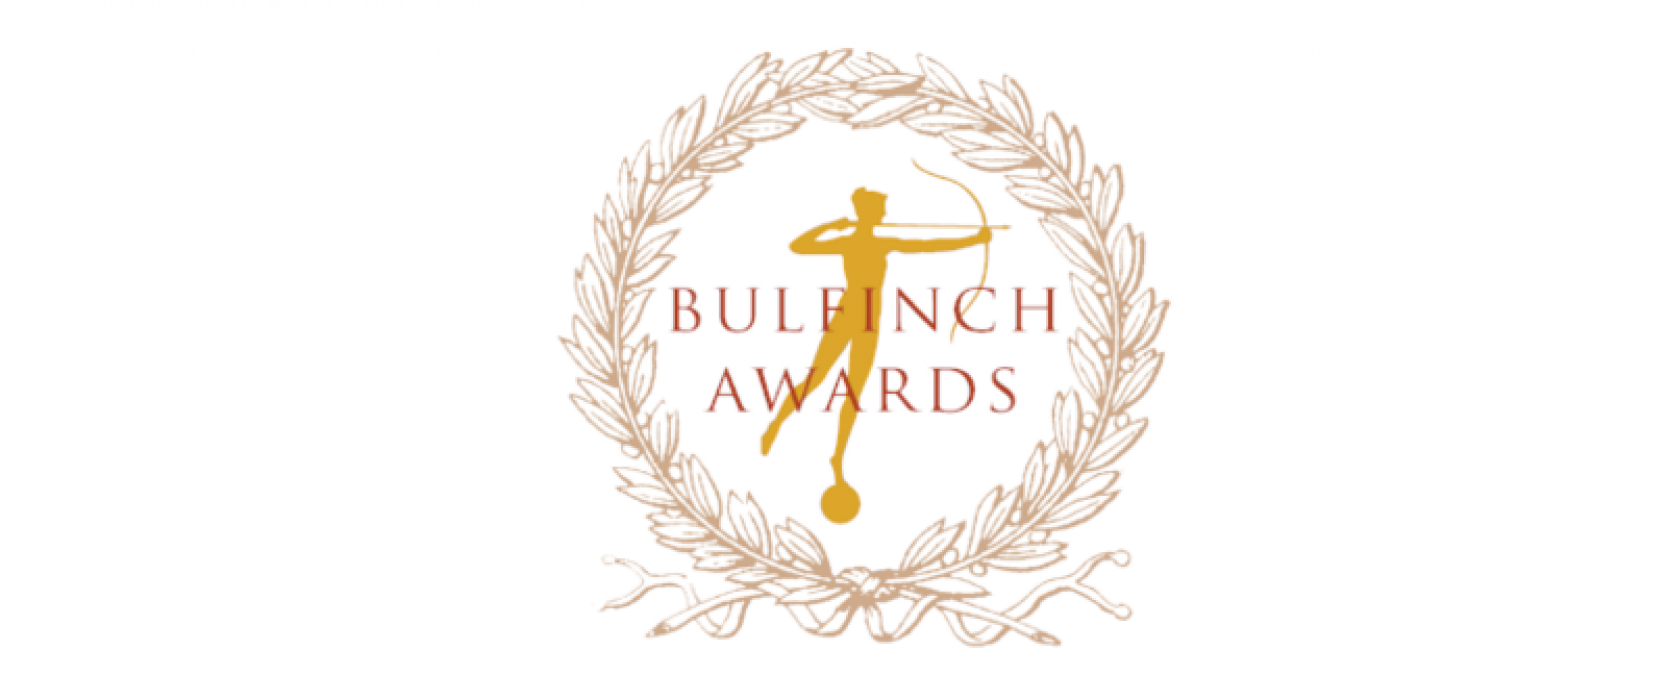 Tickets are on sale for the Seventh Bulfinch Awards presented by the Institute of Classical Architecture & Art - New England.  This year the New England chapter has expanded the scope for entries from work in New England by firms in New England to work in